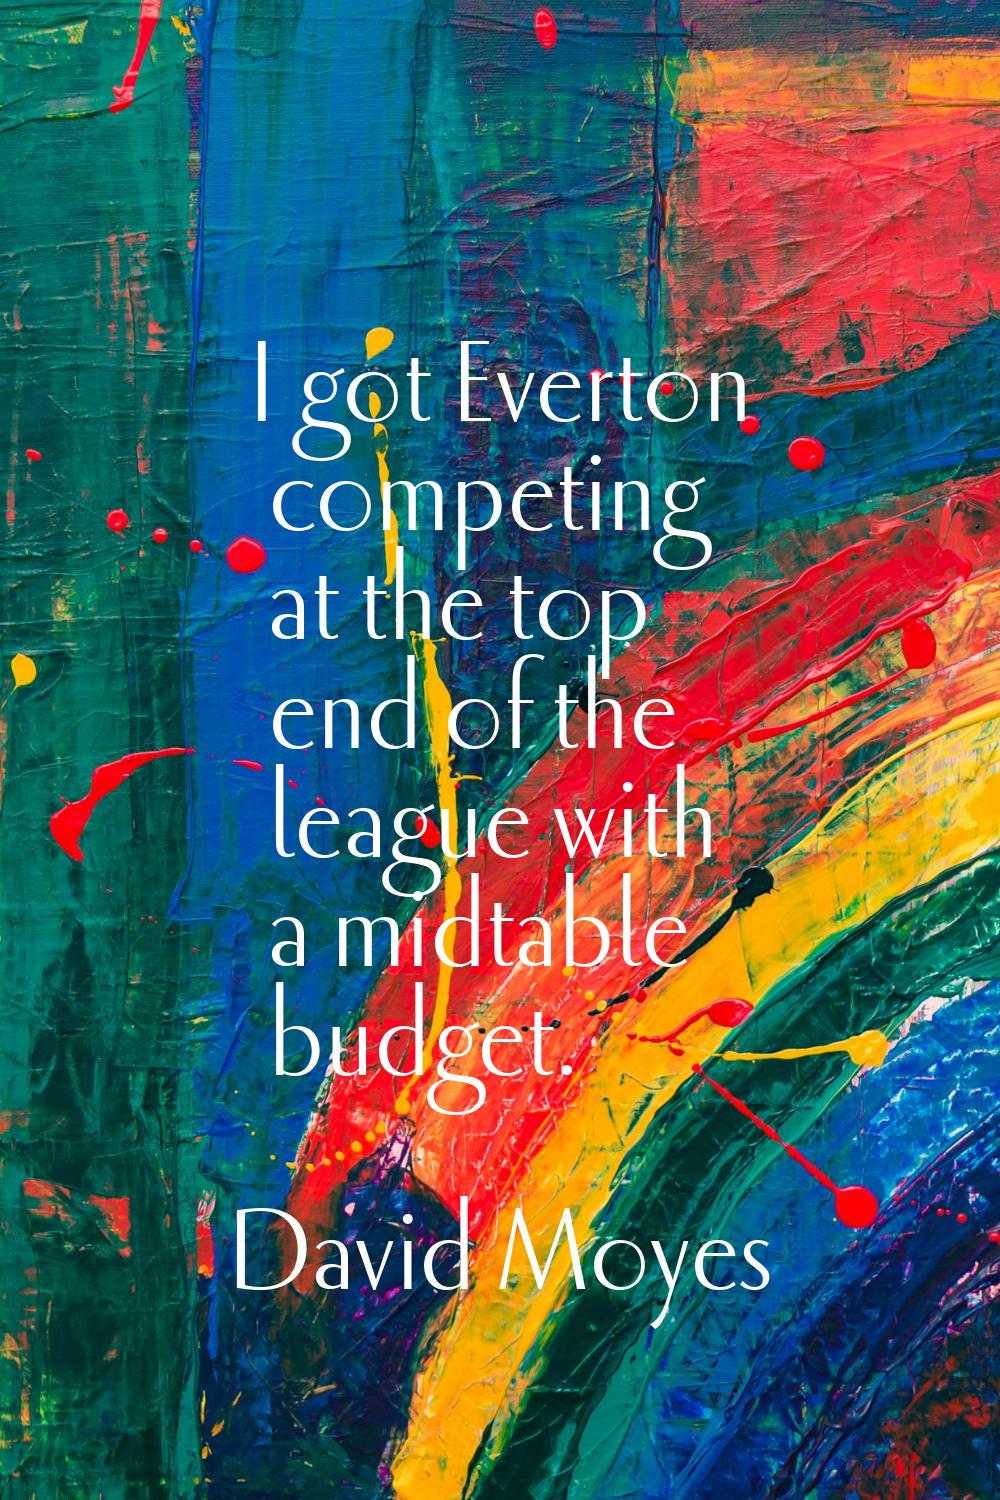 I got Everton competing at the top end of the league with a midtable budget.